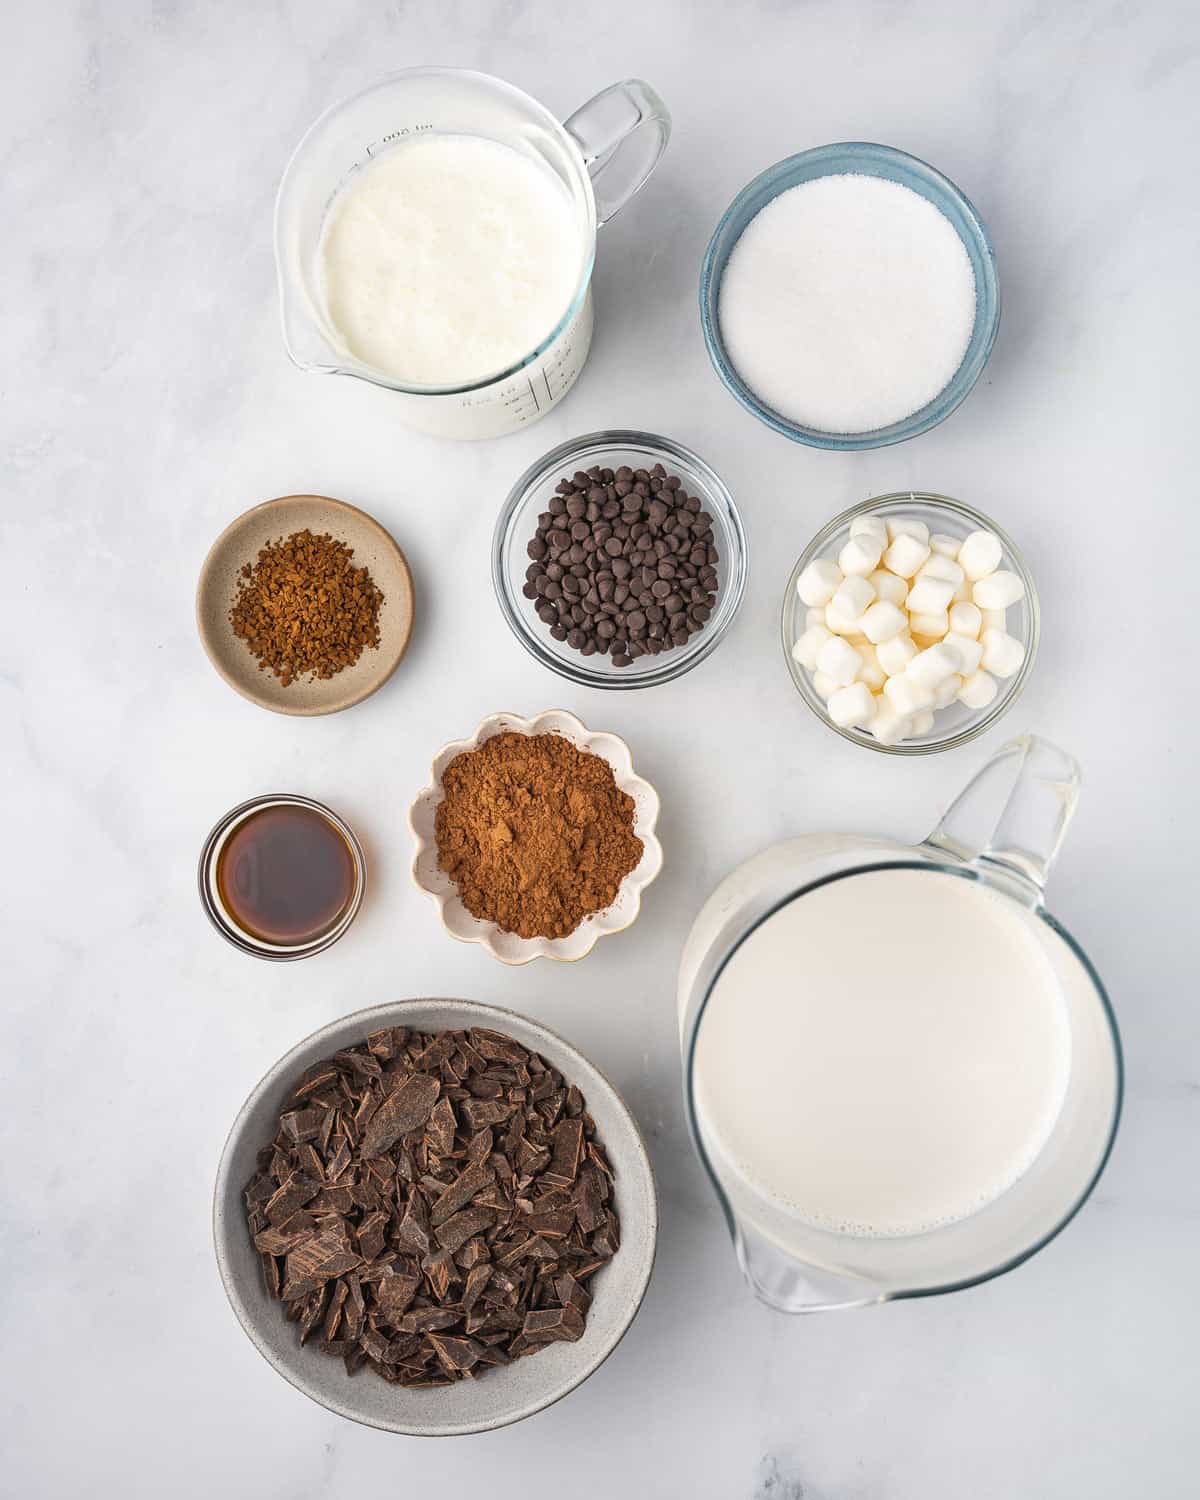 Ingredients needed to make crockpot hot chocolate.